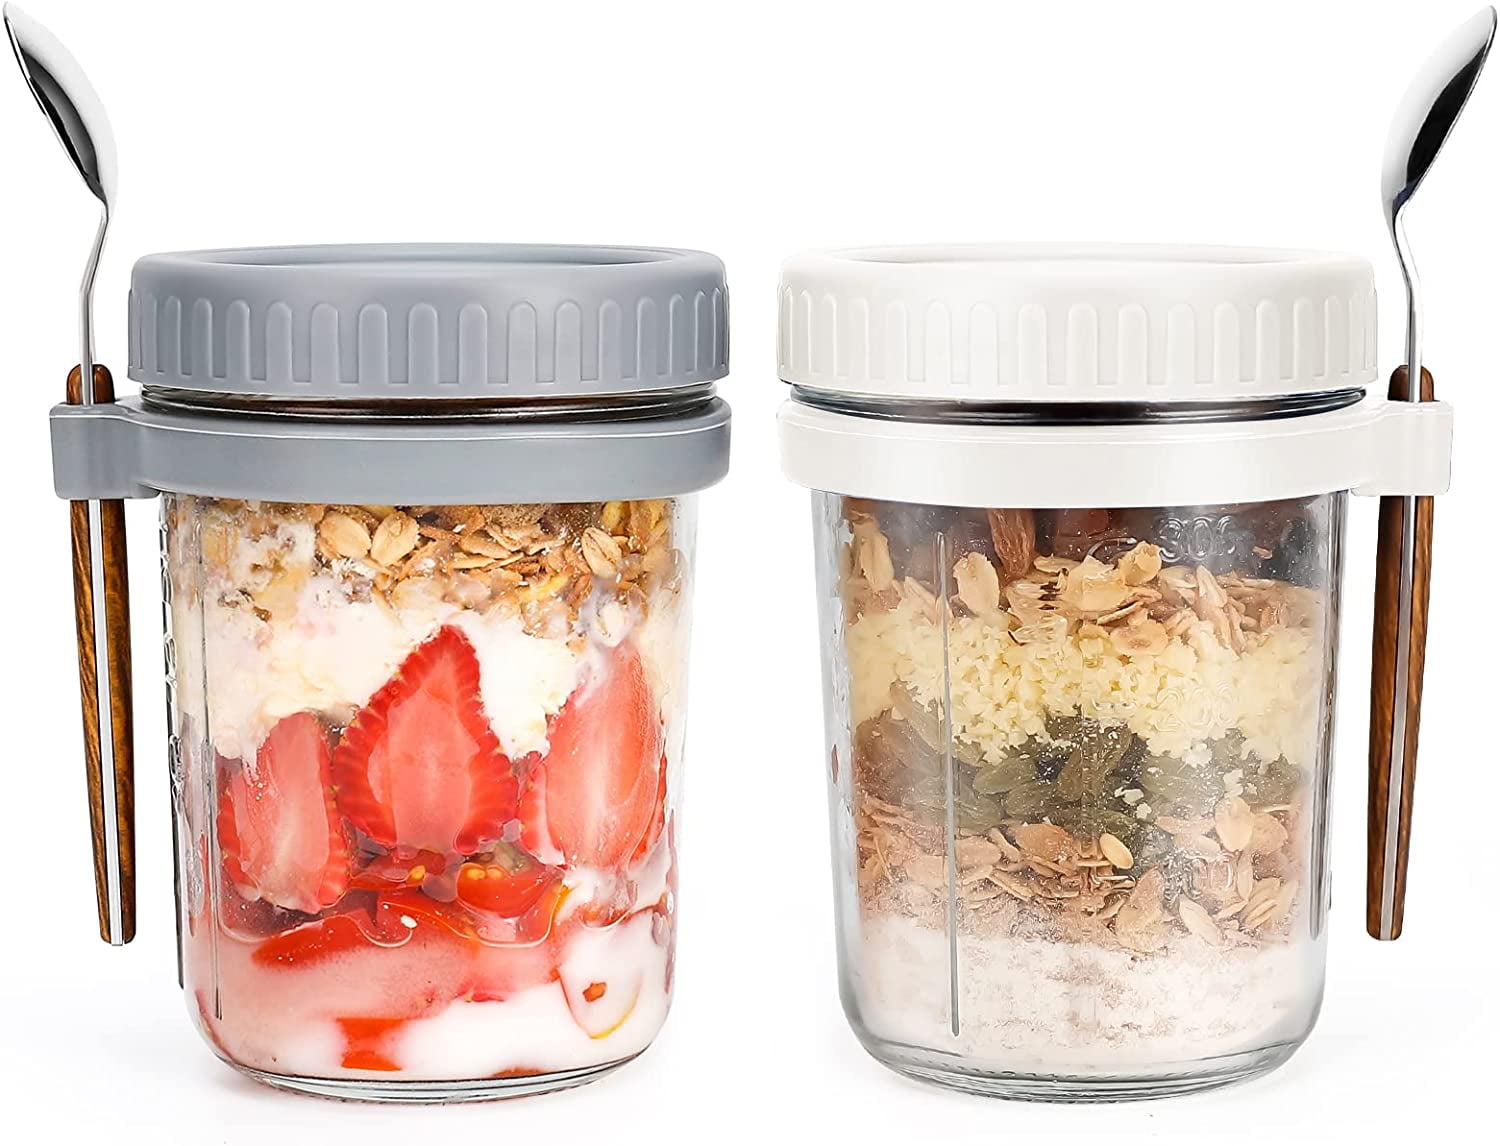 LANDNEOO 4 Pack Overnight Oats Containers with Lids and Spoons, 24 oz Glass  Mason Jars for Overnight Oats, Large Capacity Airtight Jars for Milk